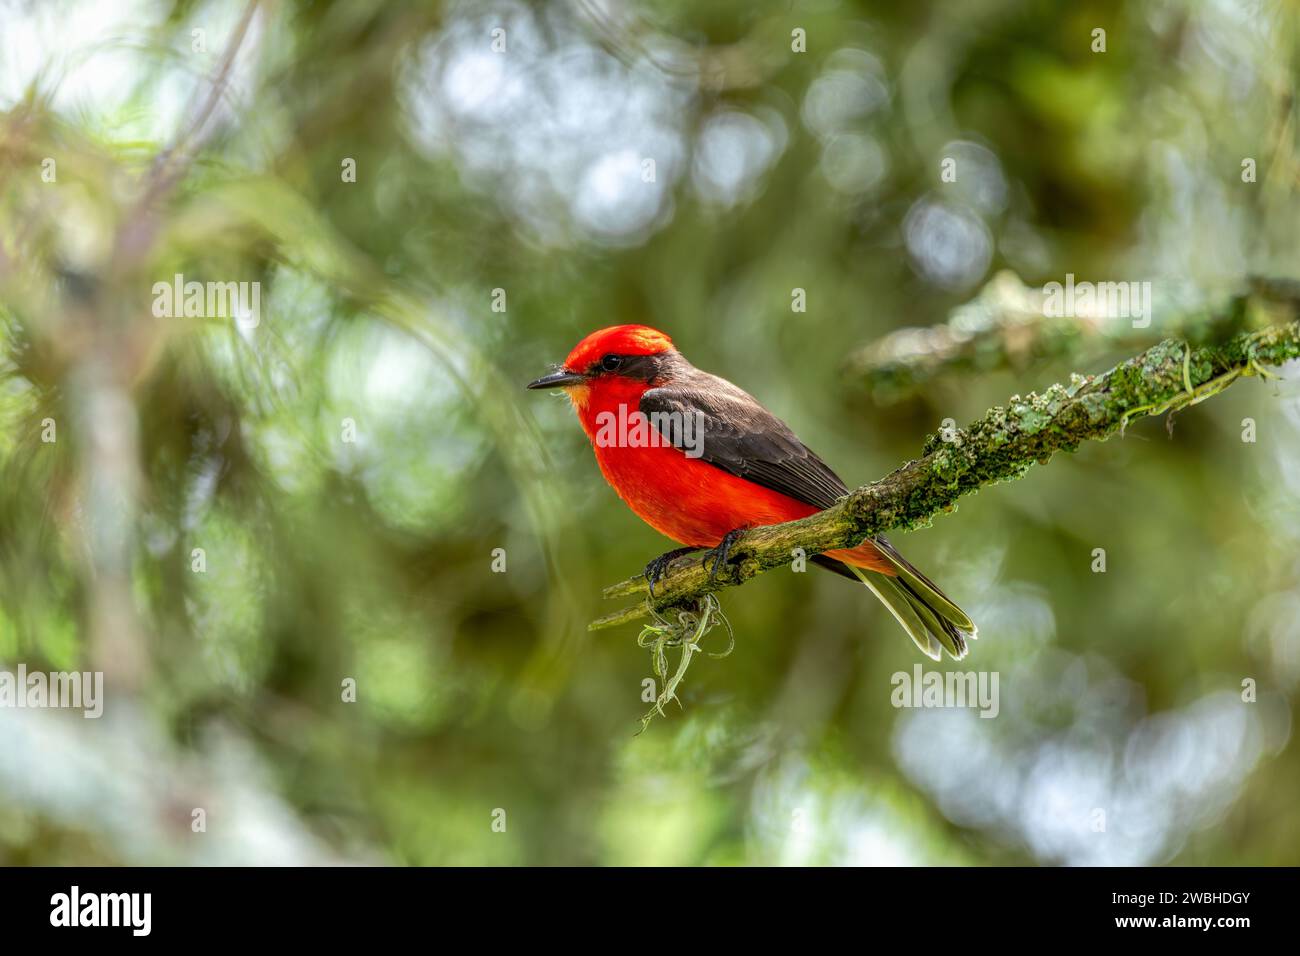 Vermilion flycatcher (Pyrocephalus obscurus) male, small passerine bird in the tyrant flycatcher family. Barichara, Santander department. Wildlife and Stock Photo